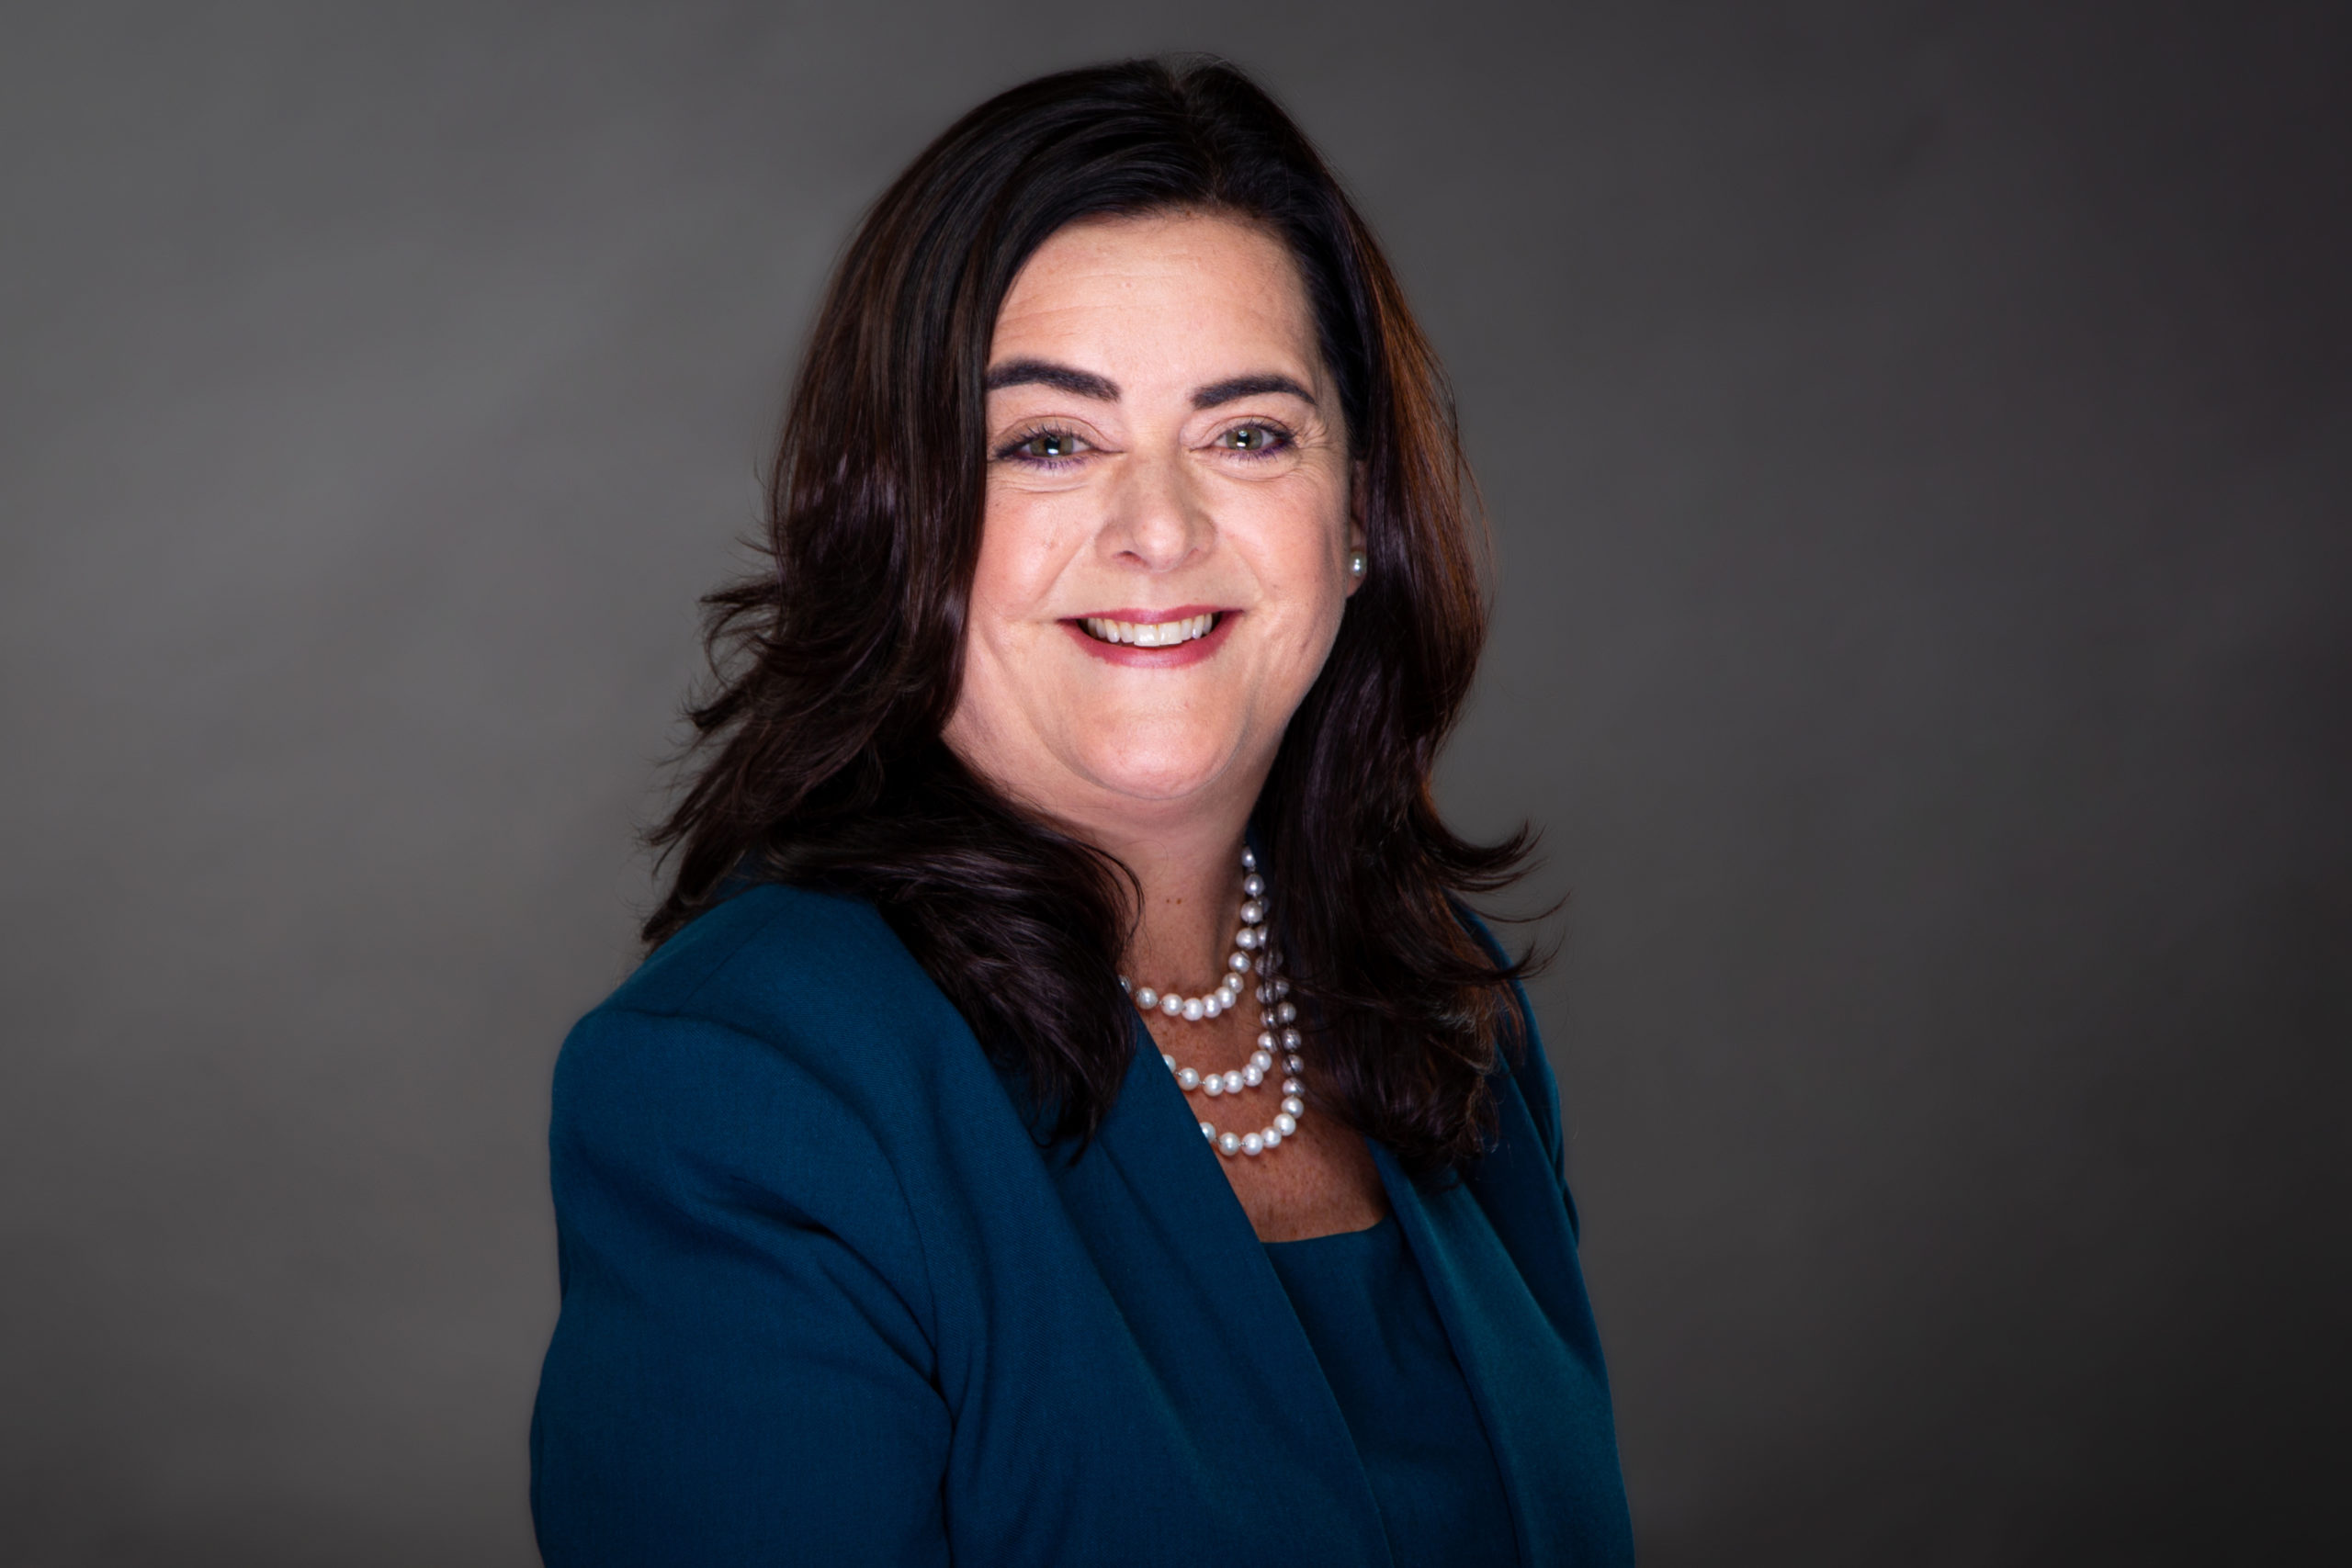 Michele Streton, President and CEO effective February 23, 2021